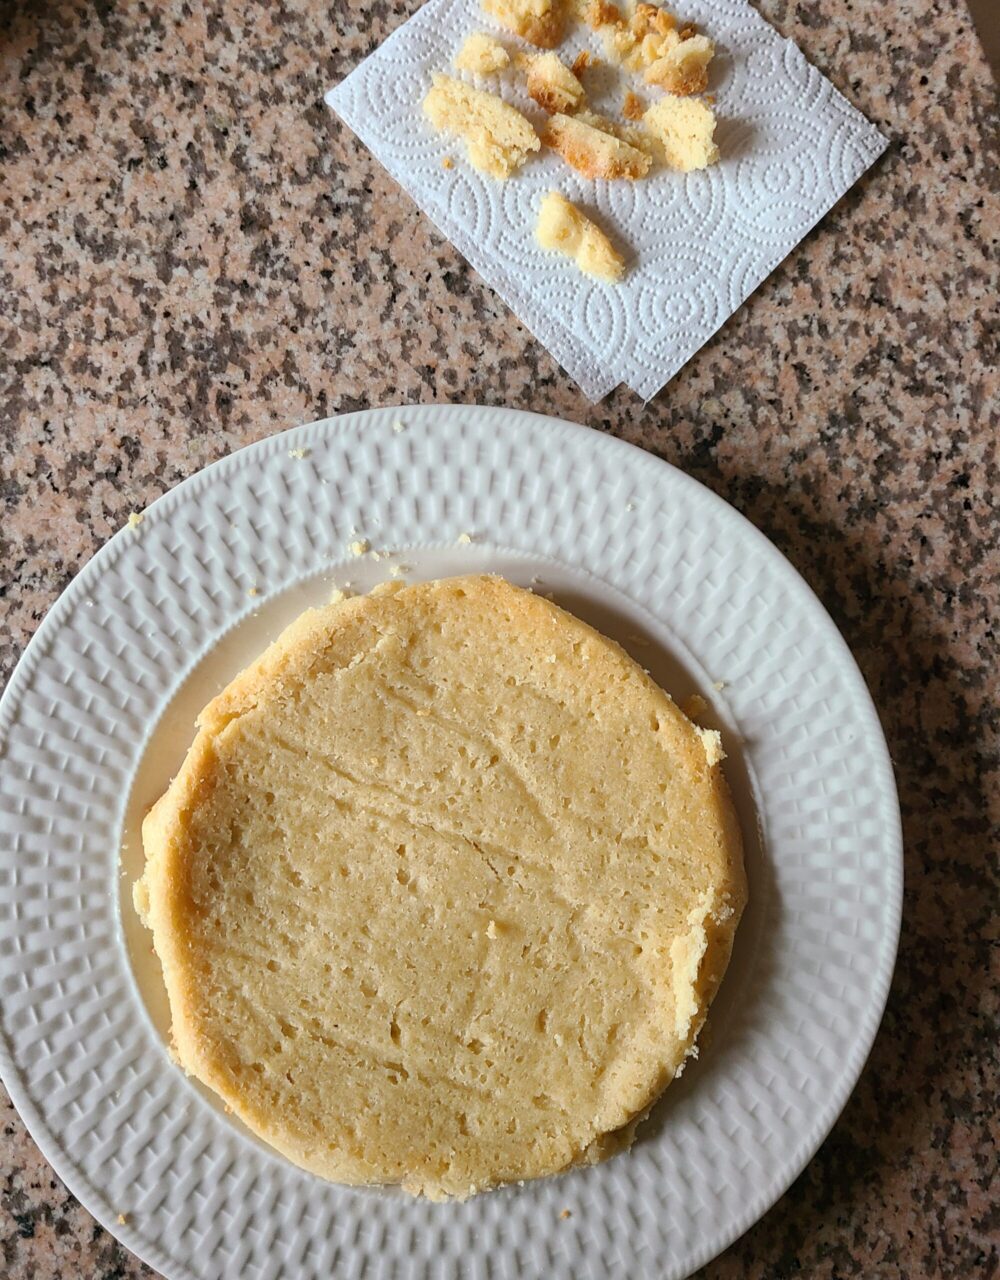 vegan shortbread on a white plate next to cake pieces on a paper towel